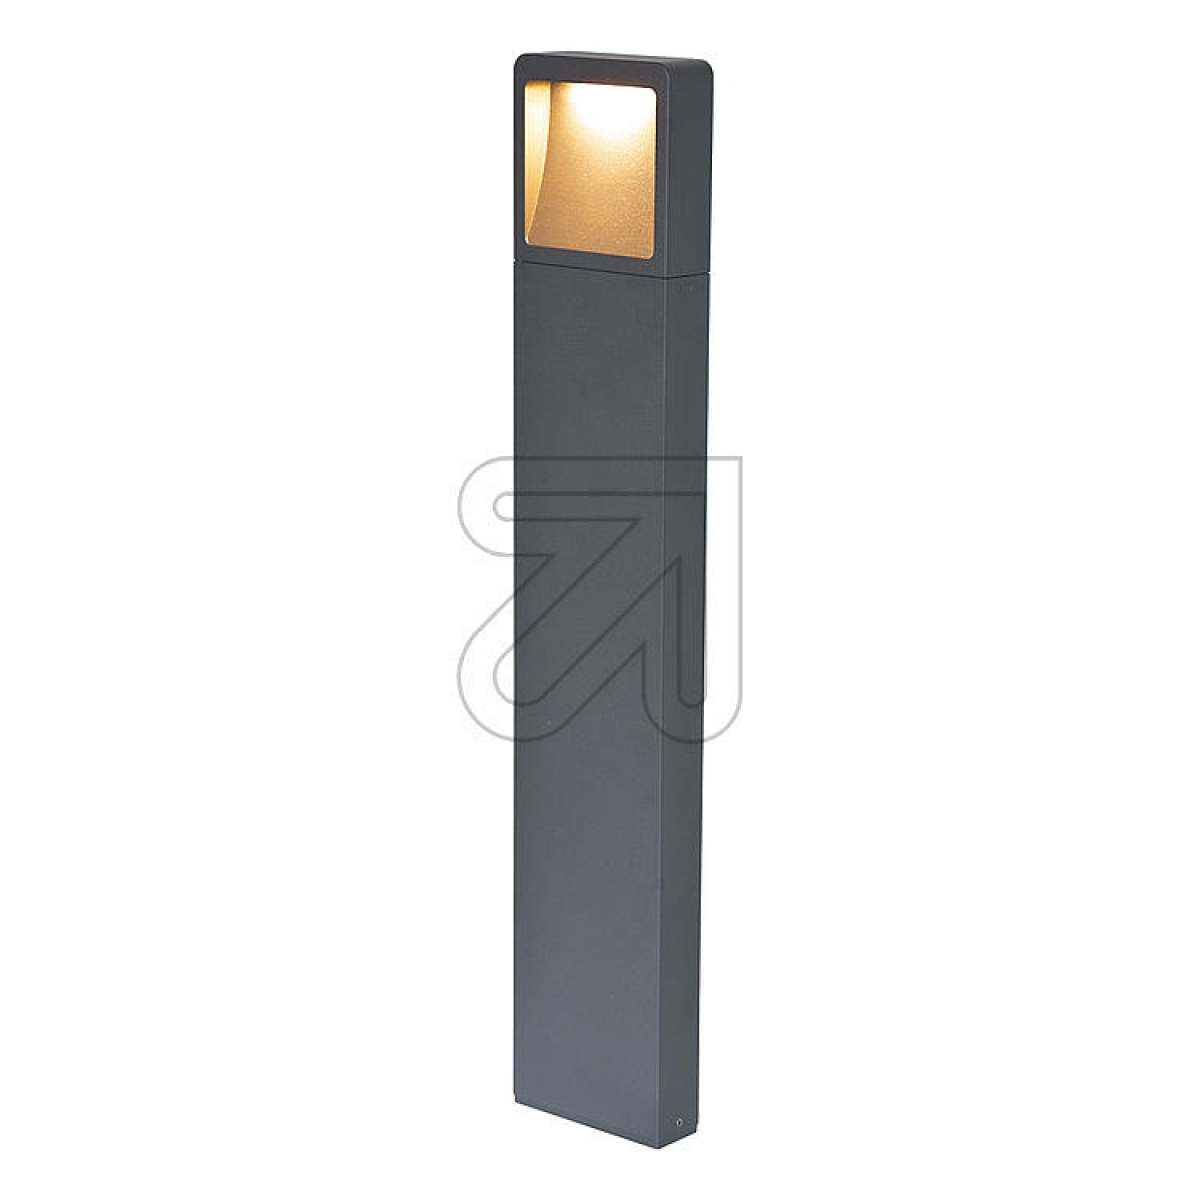 EVNLED path light anthracite IP54 3000K 6W WLF65061502Article-No: 627105